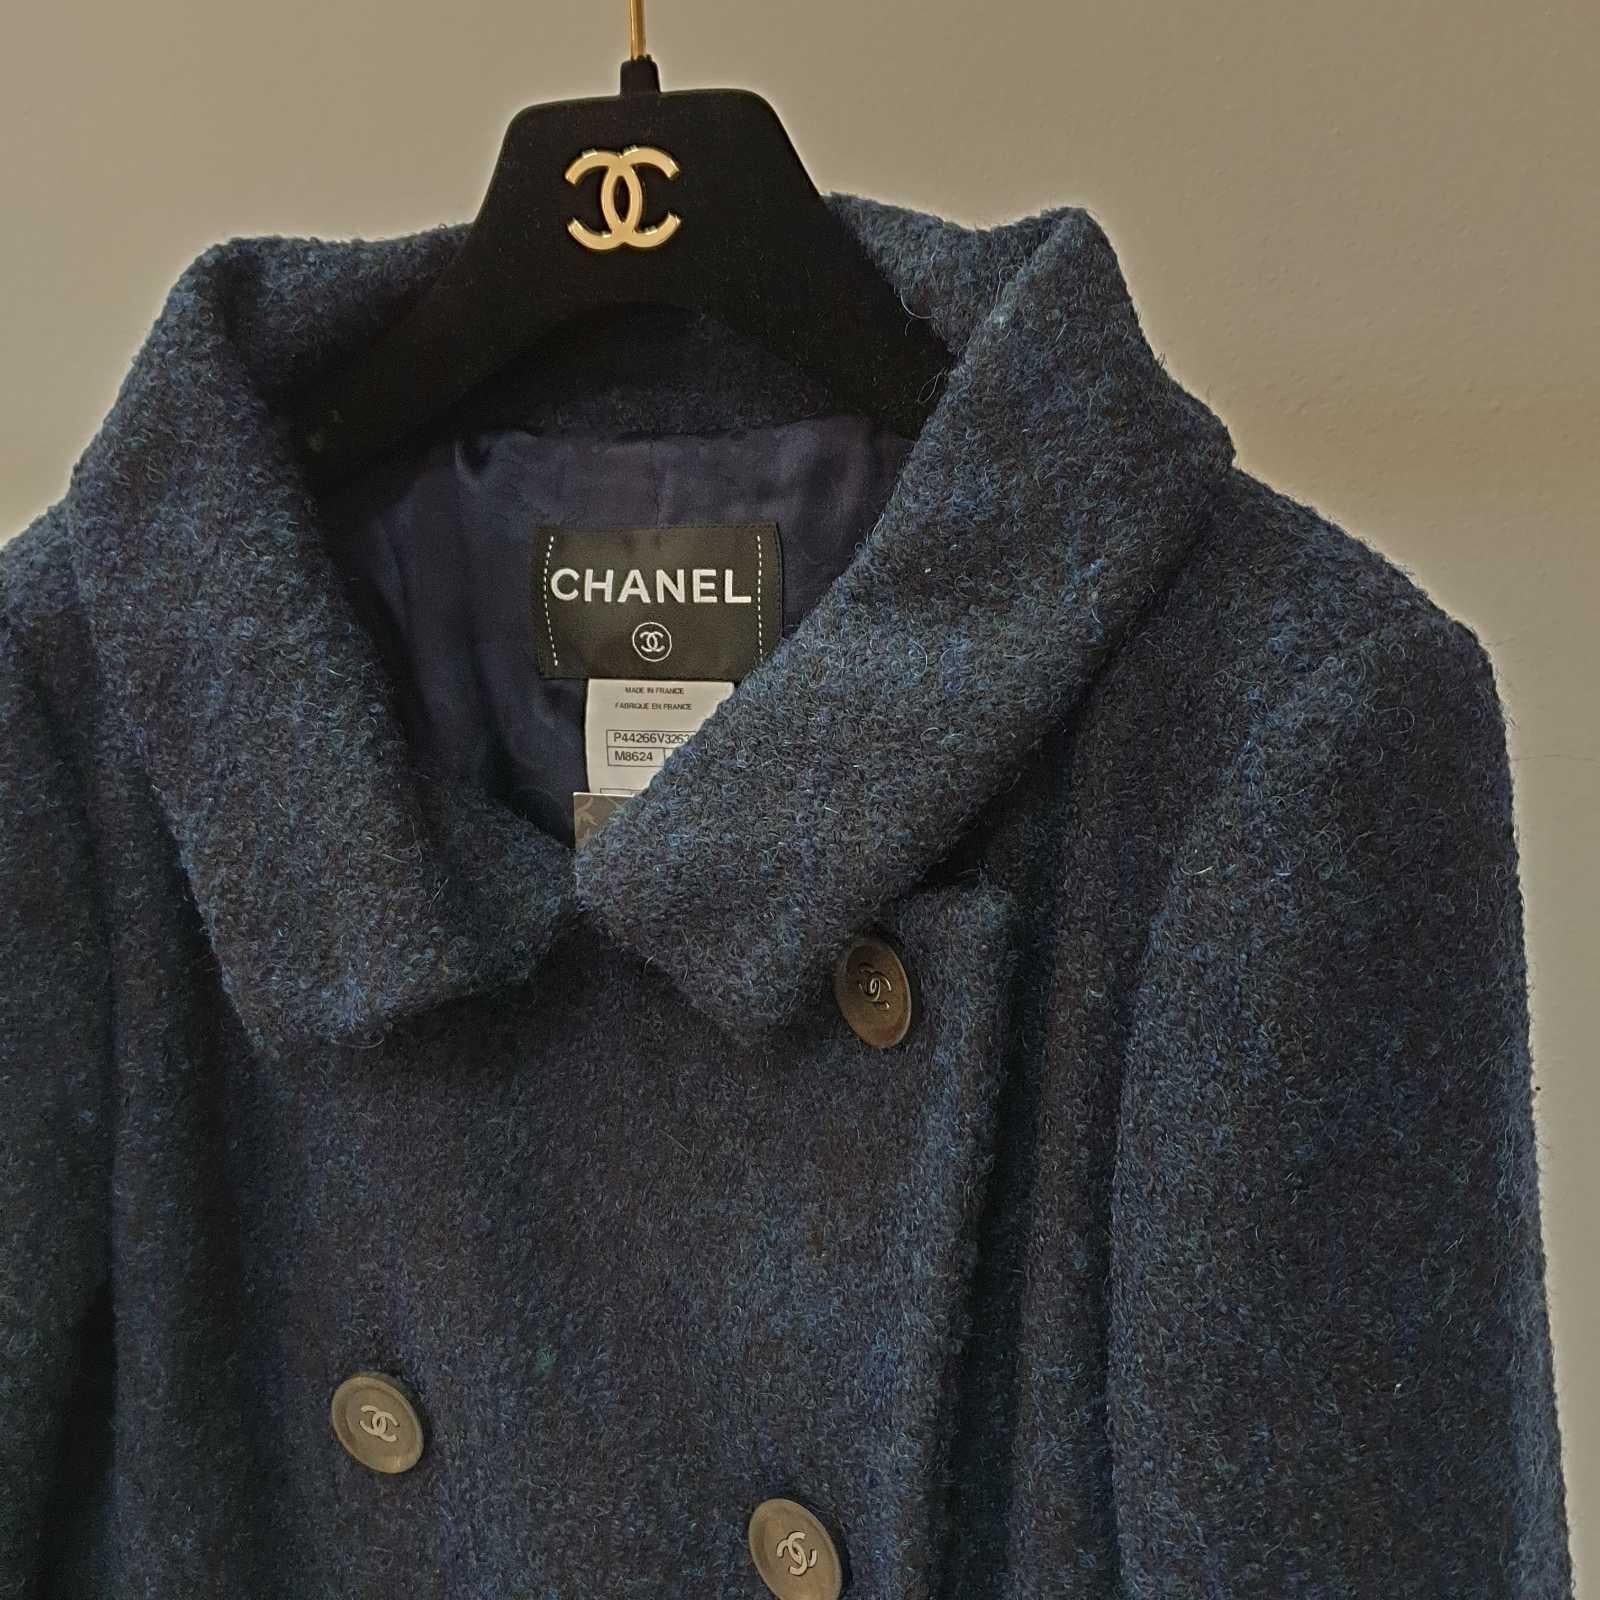 Chanel Navy Wool Long Length Coat CC Buttons

Product details:
Size FR 36
Double lined w/ Chanel logo navy silk fabric 
Silver tone CC buttons
Front button closure 
59% Wool, 24% nylon, 17% alpaca
Very good condition.
For buyers from EU we can